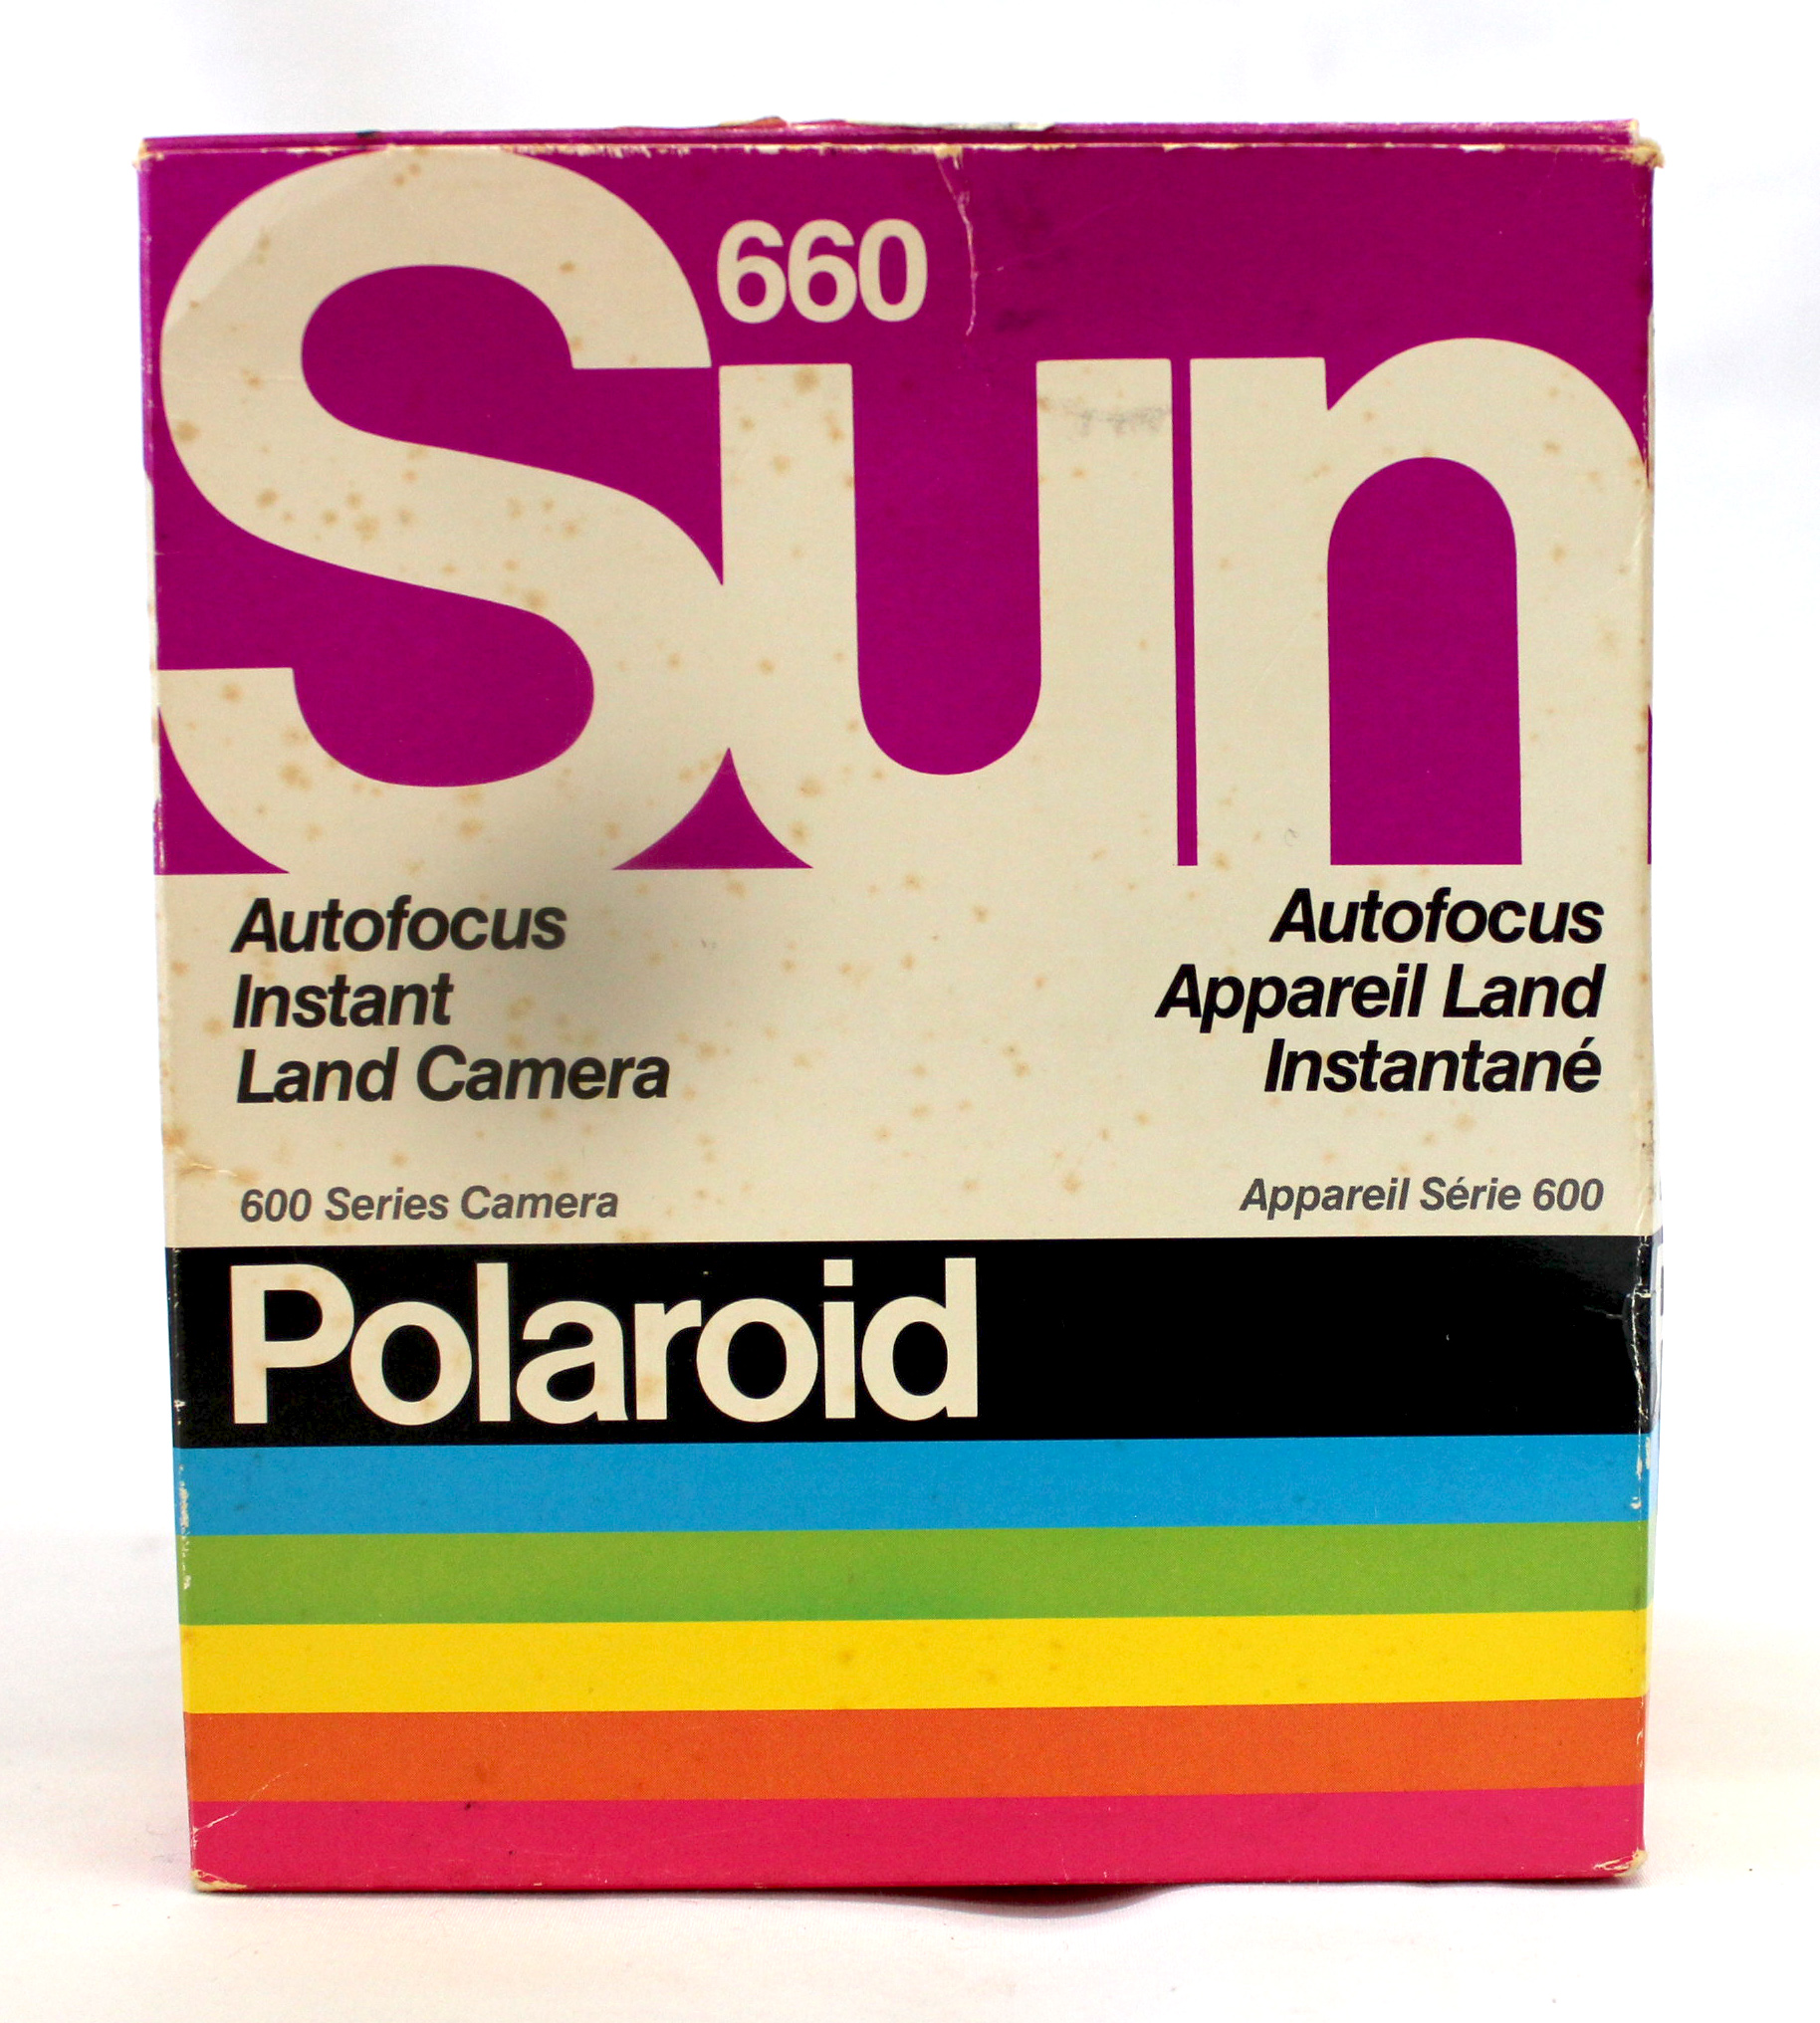  Polaroid Sun 660 AF Autofocus Instant Land Camera in Box from Japan Photo 10